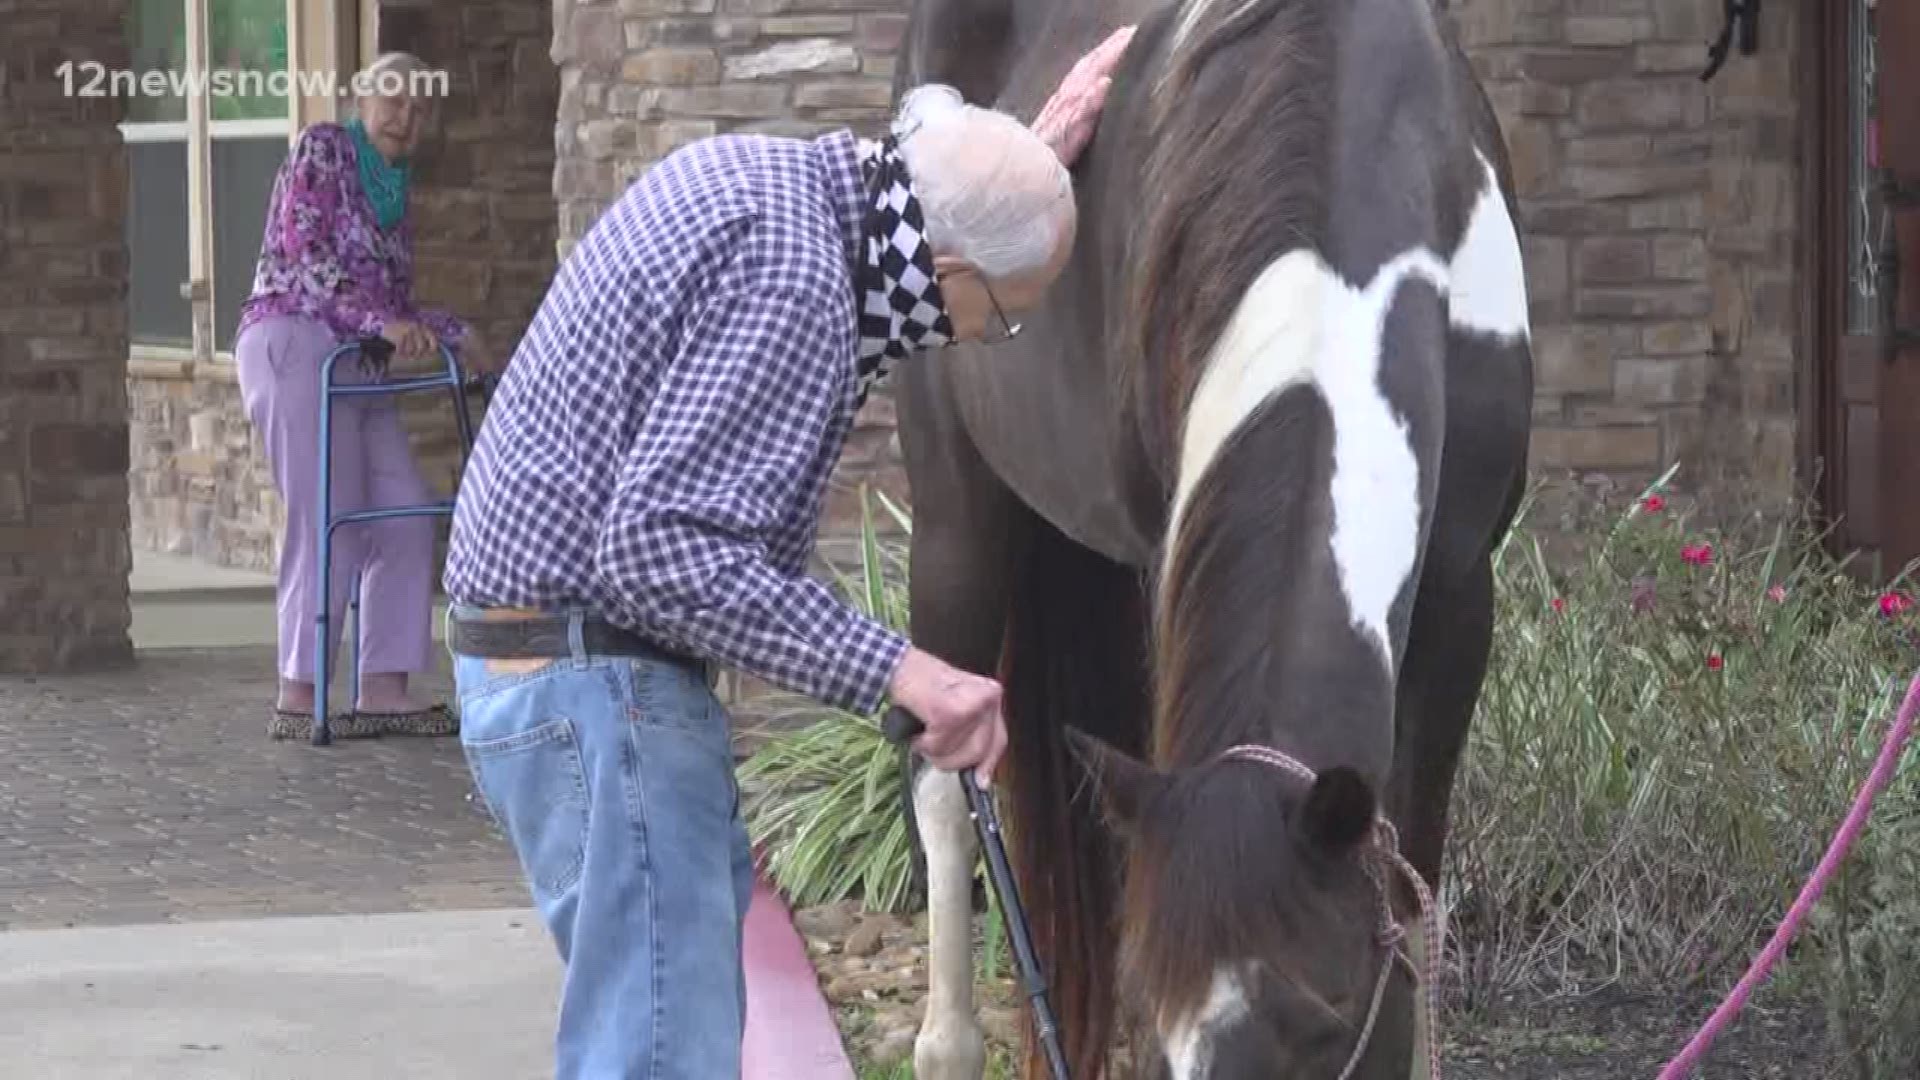 Normally, residents get to see therapy dogs. On Tuesday, they saw therapy horses instead